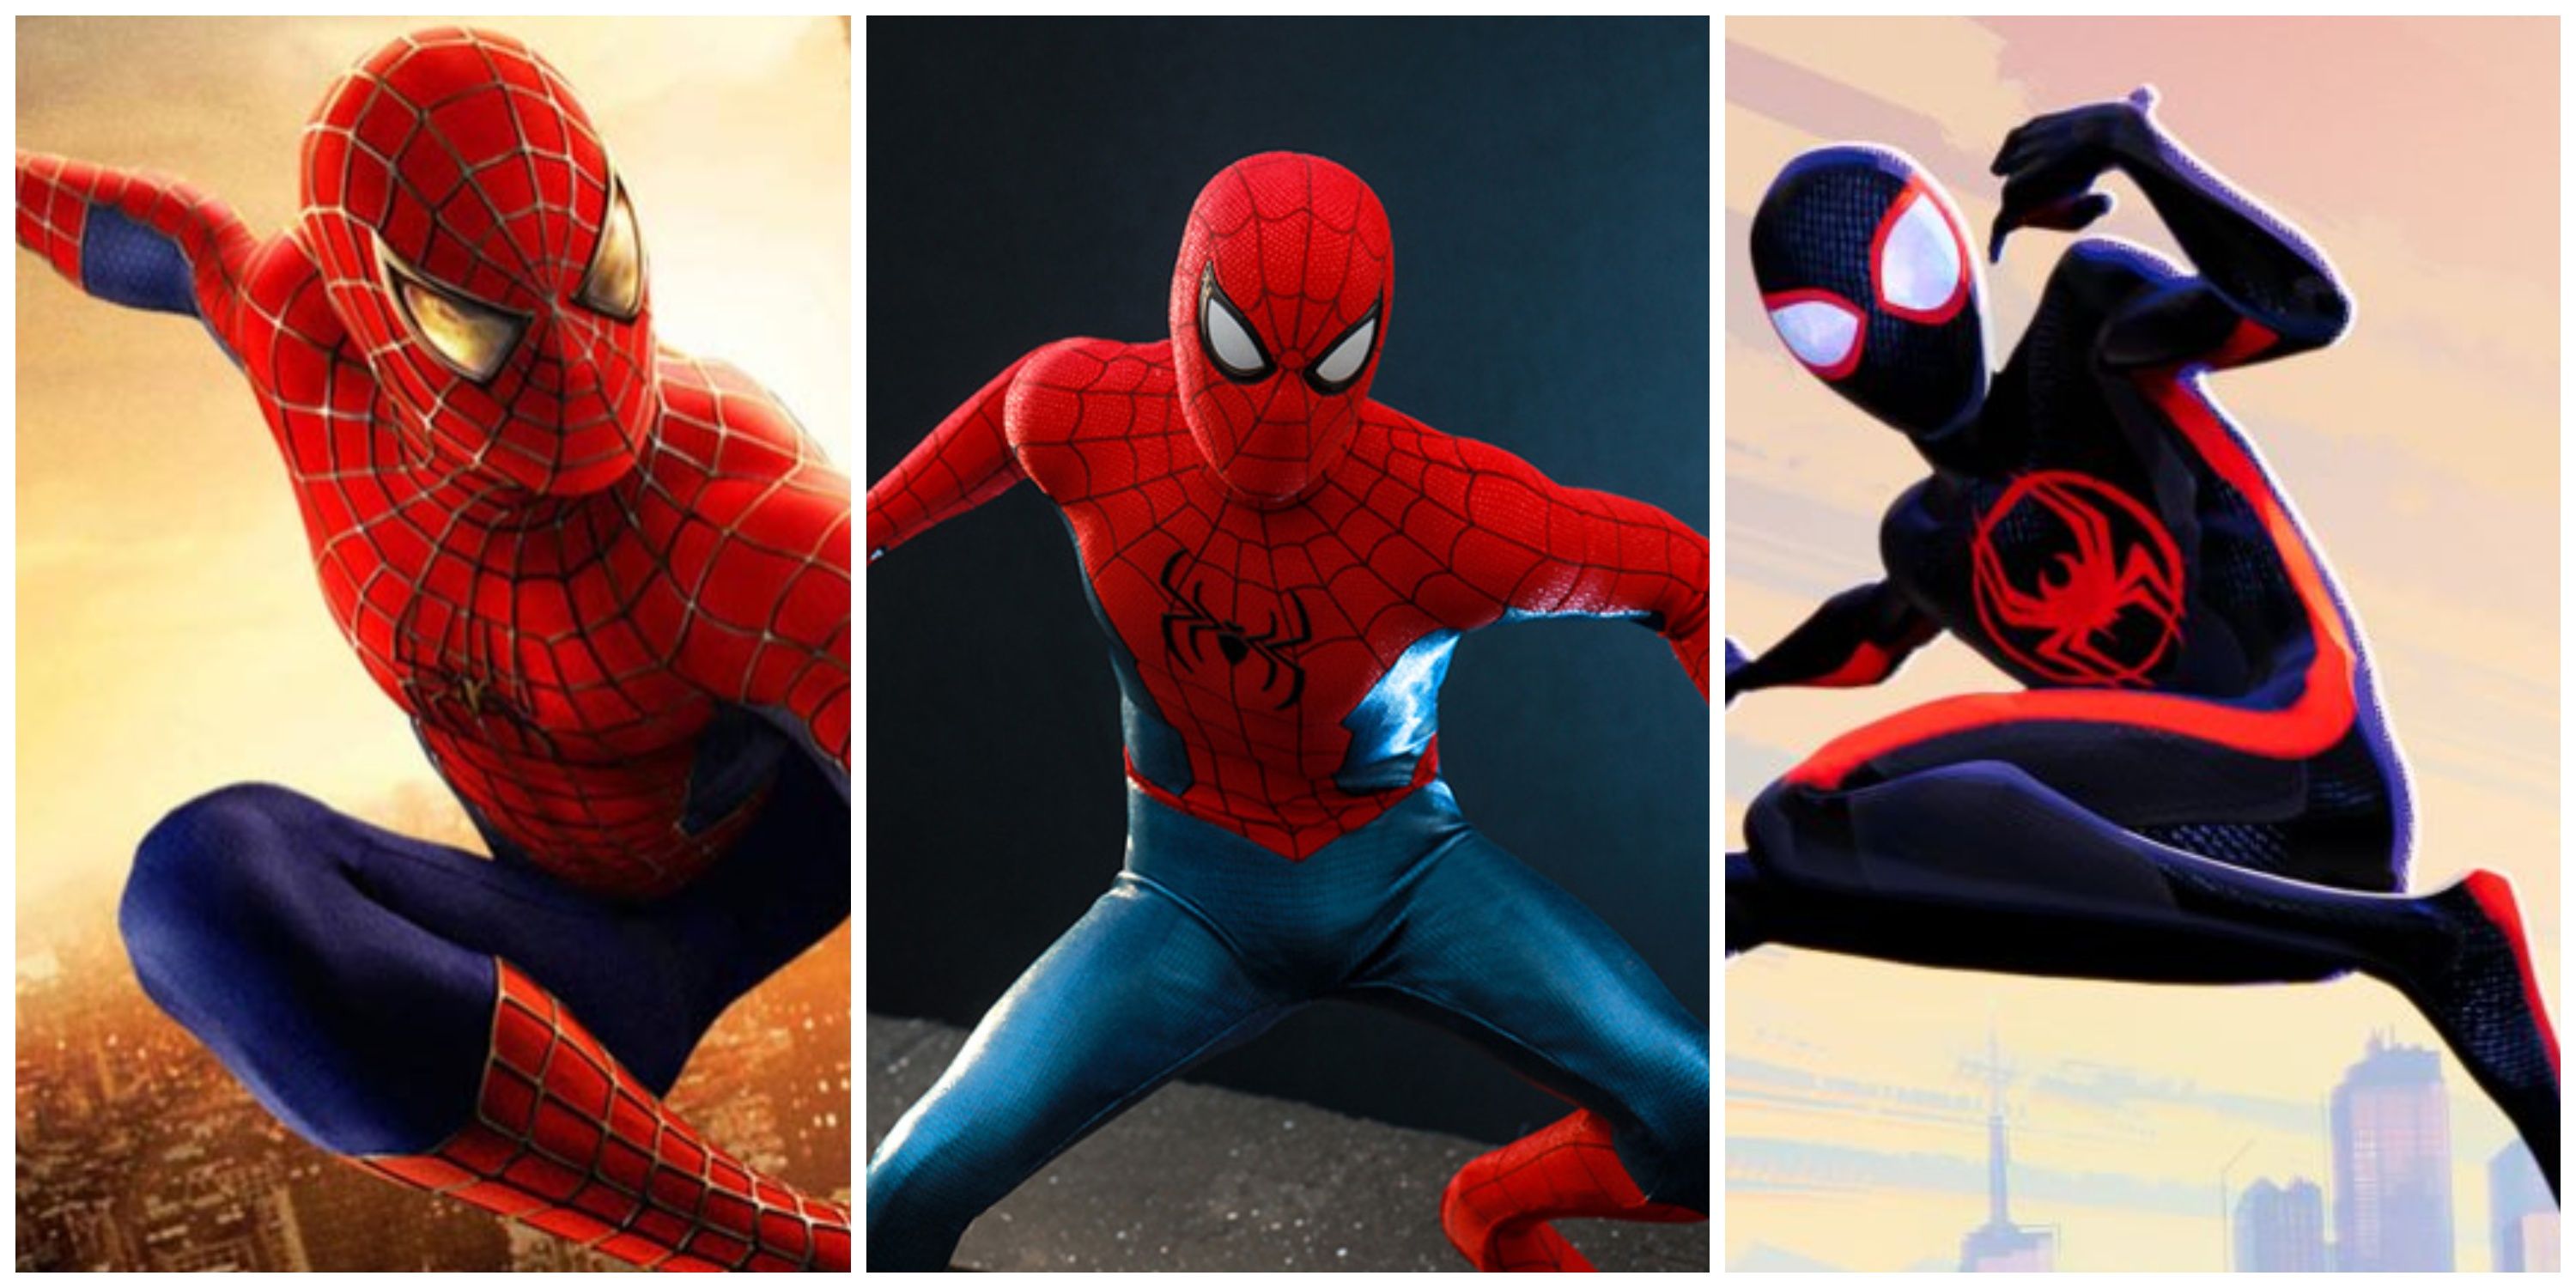 Does anyone play Marvel's Spider-Man? So this is my opinion: the 3 best  Spider-Man suits (Spirit Spider suit - on the left side, Sam Raimi/Webbed  suit - in the middle, Undies suit 